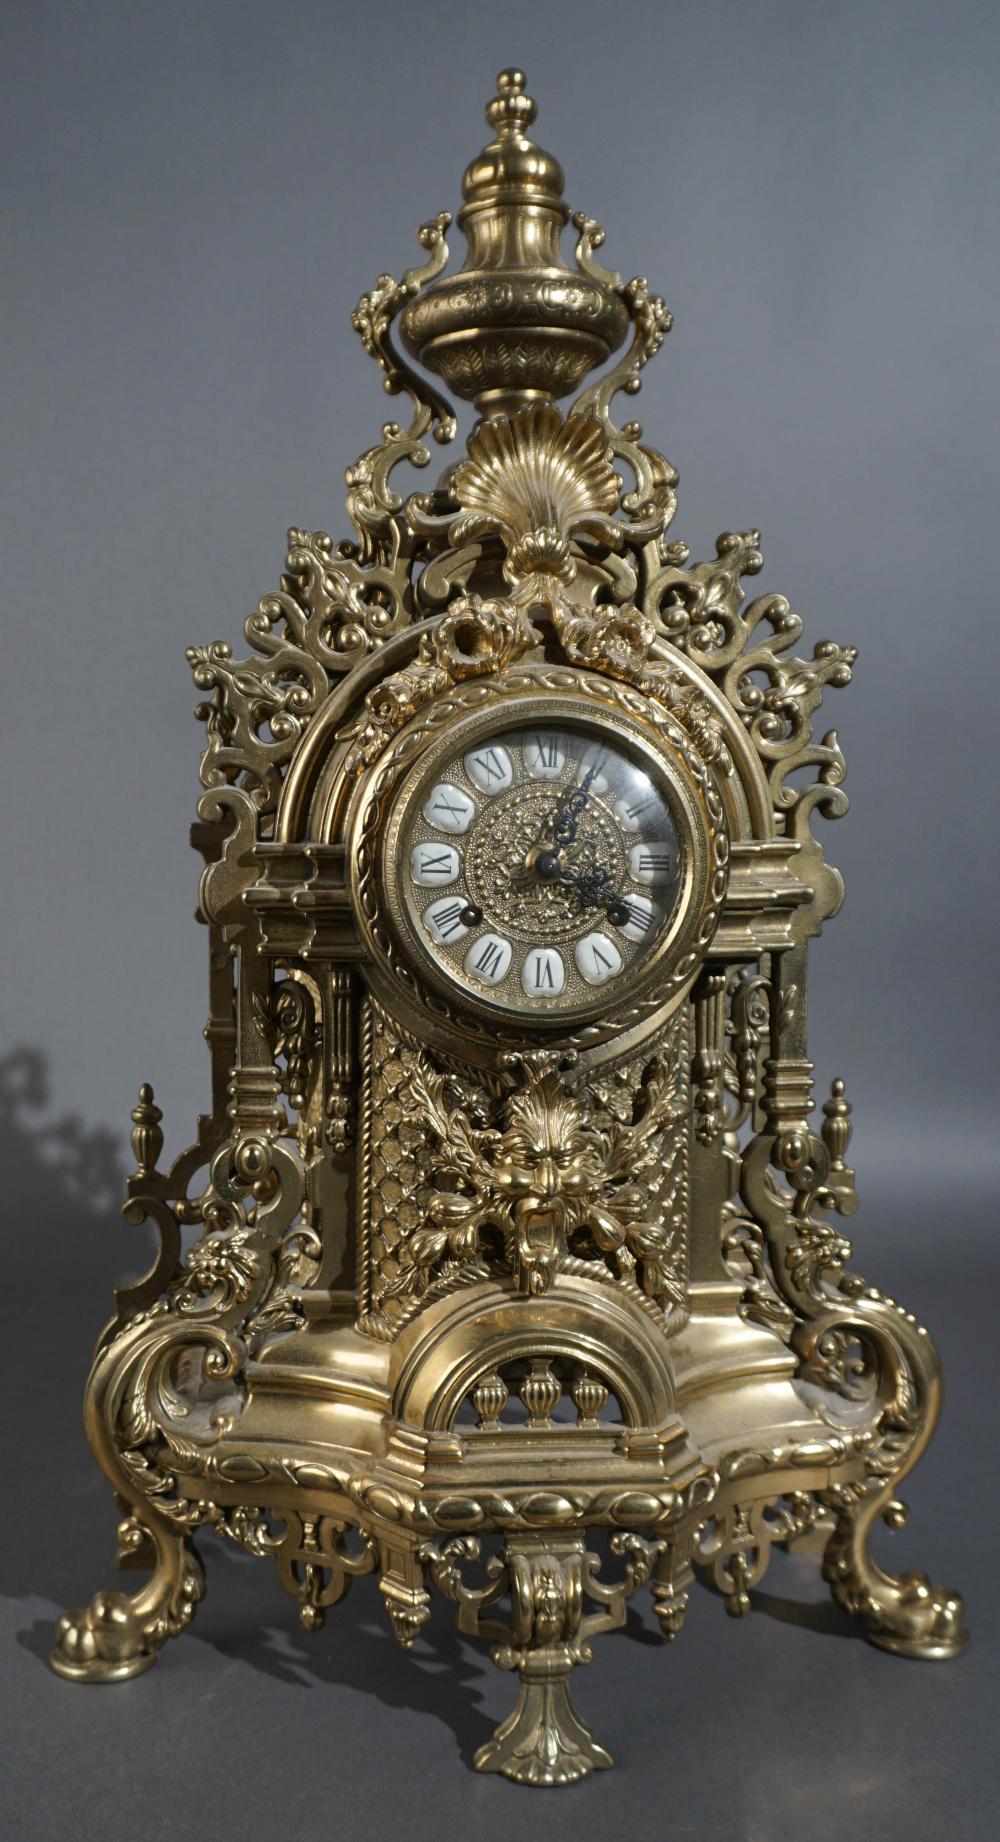 FRANZ HERMLE & SONS ROCOCO STYLE BRONZE